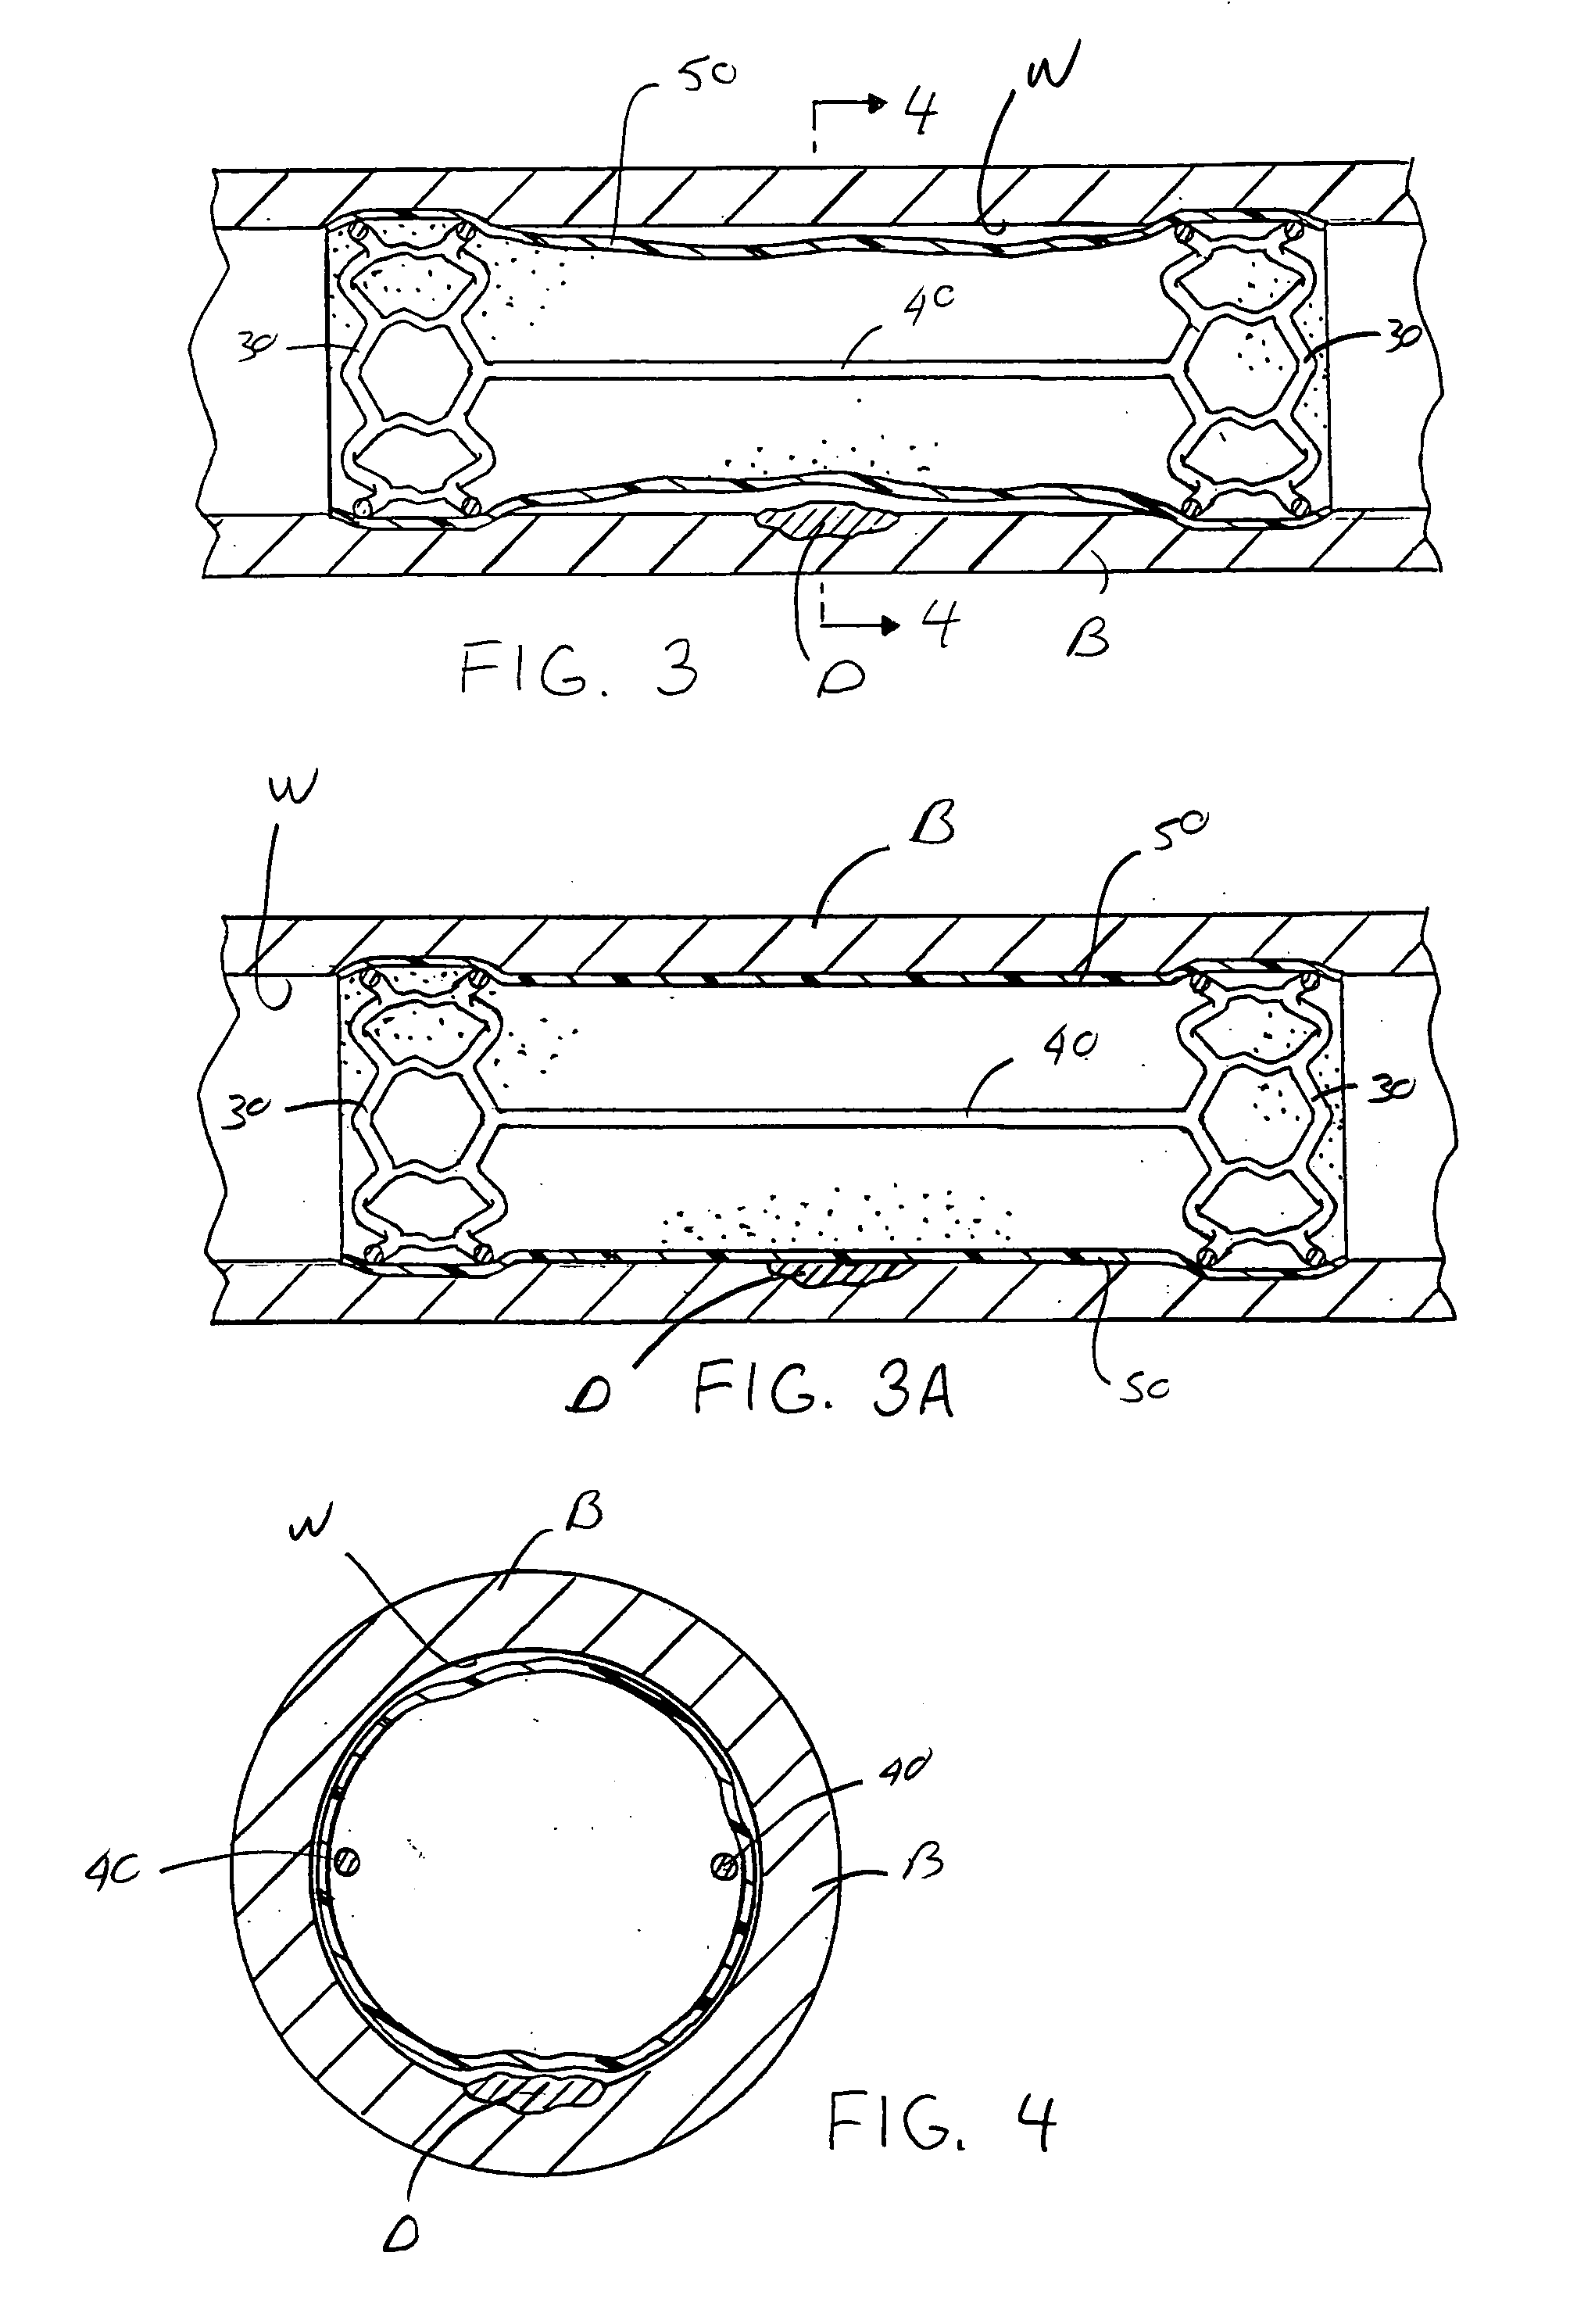 Vascular protective device